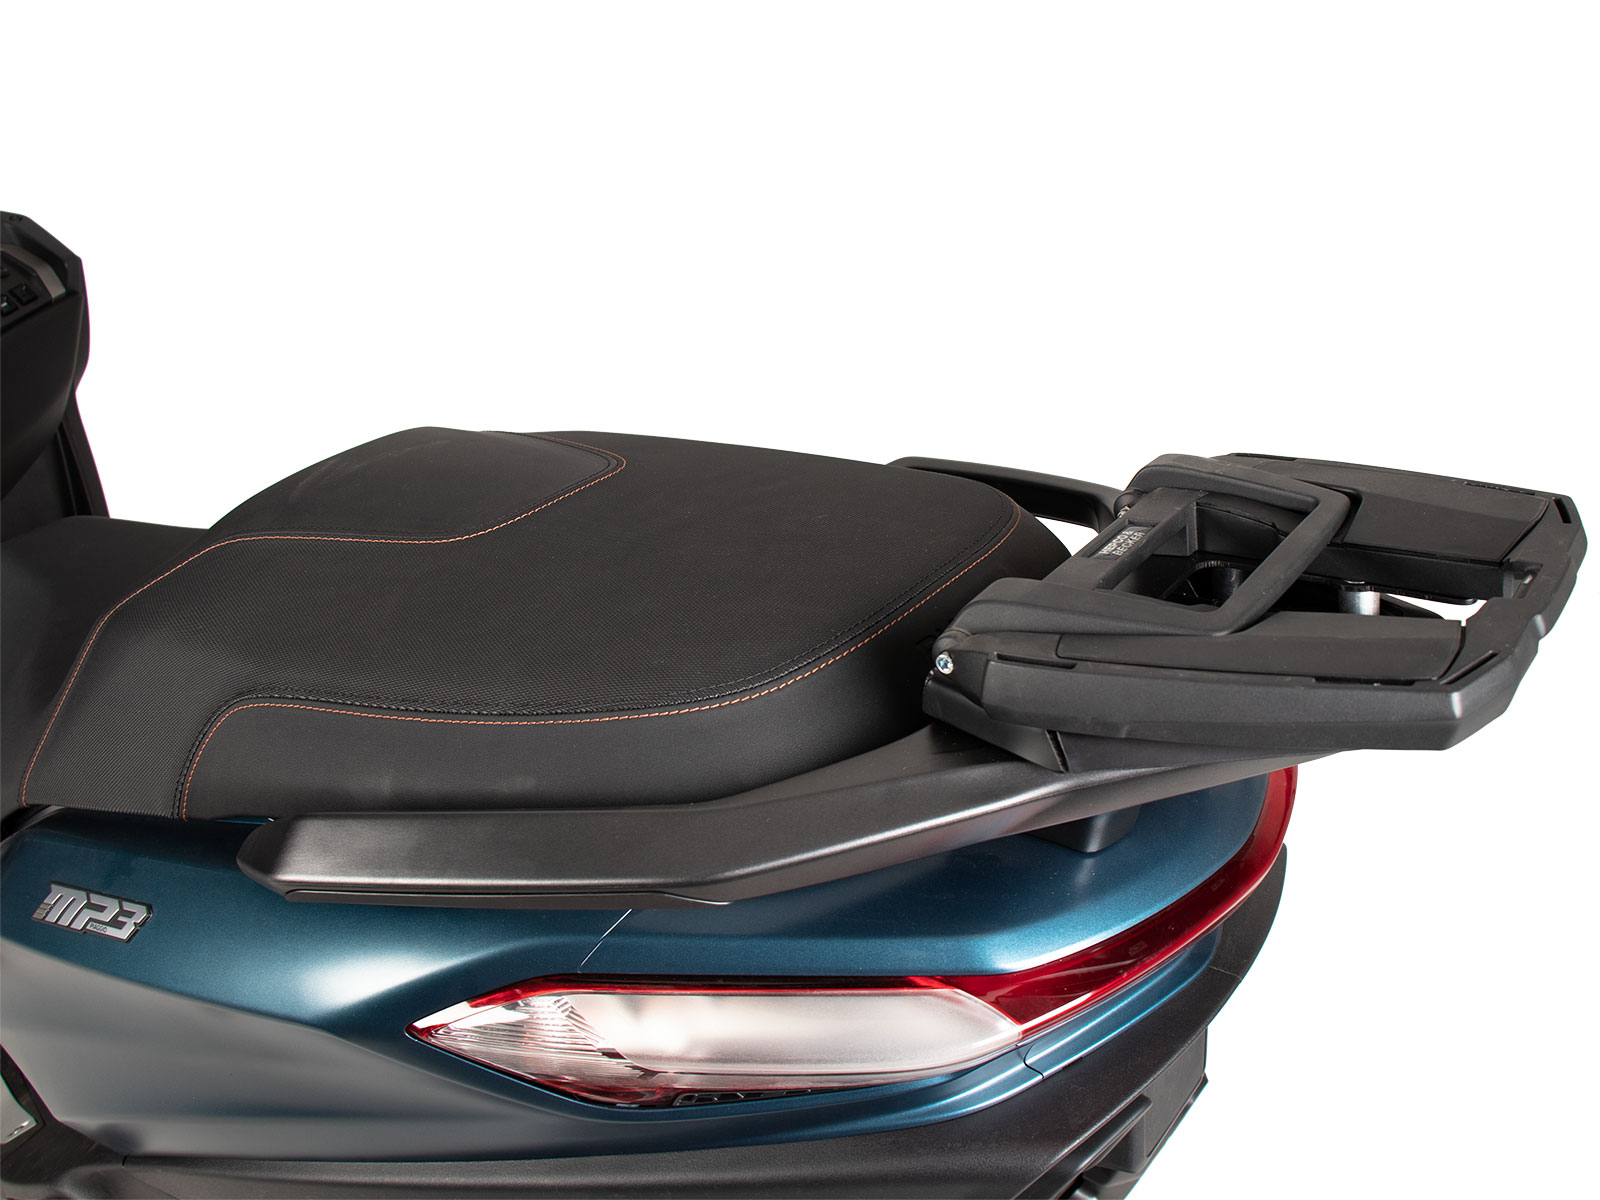 Easyrack topcasecarrier black for combination with original rear rack for Piaggio MP3 400 / MP3 Sport 400 (2022-)